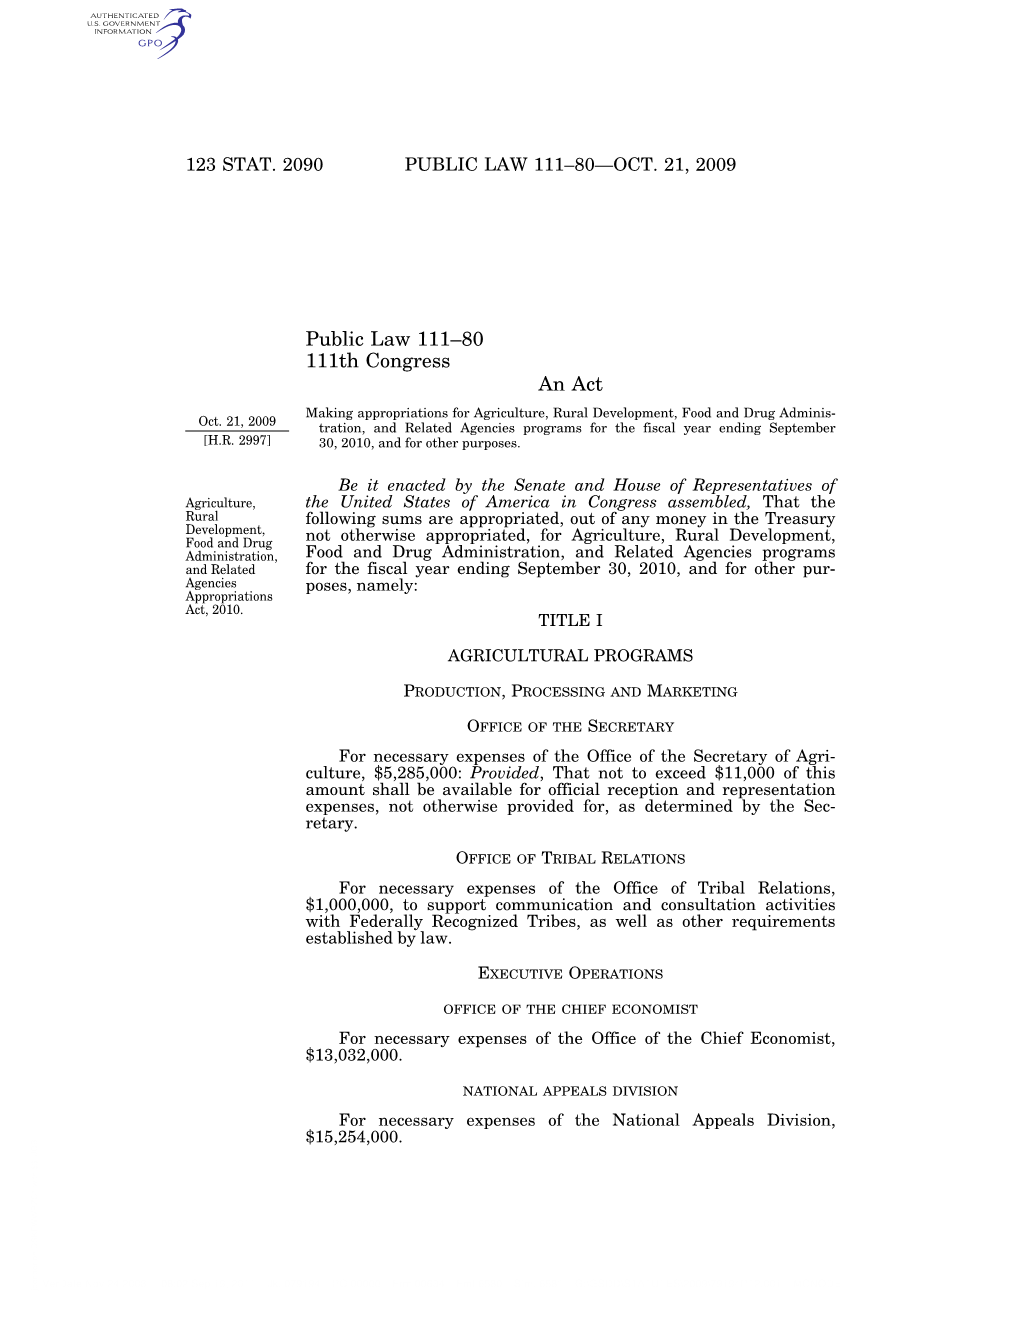 Public Law 111–80 111Th Congress an Act Making Appropriations for Agriculture, Rural Development, Food and Drug Adminis- Oct